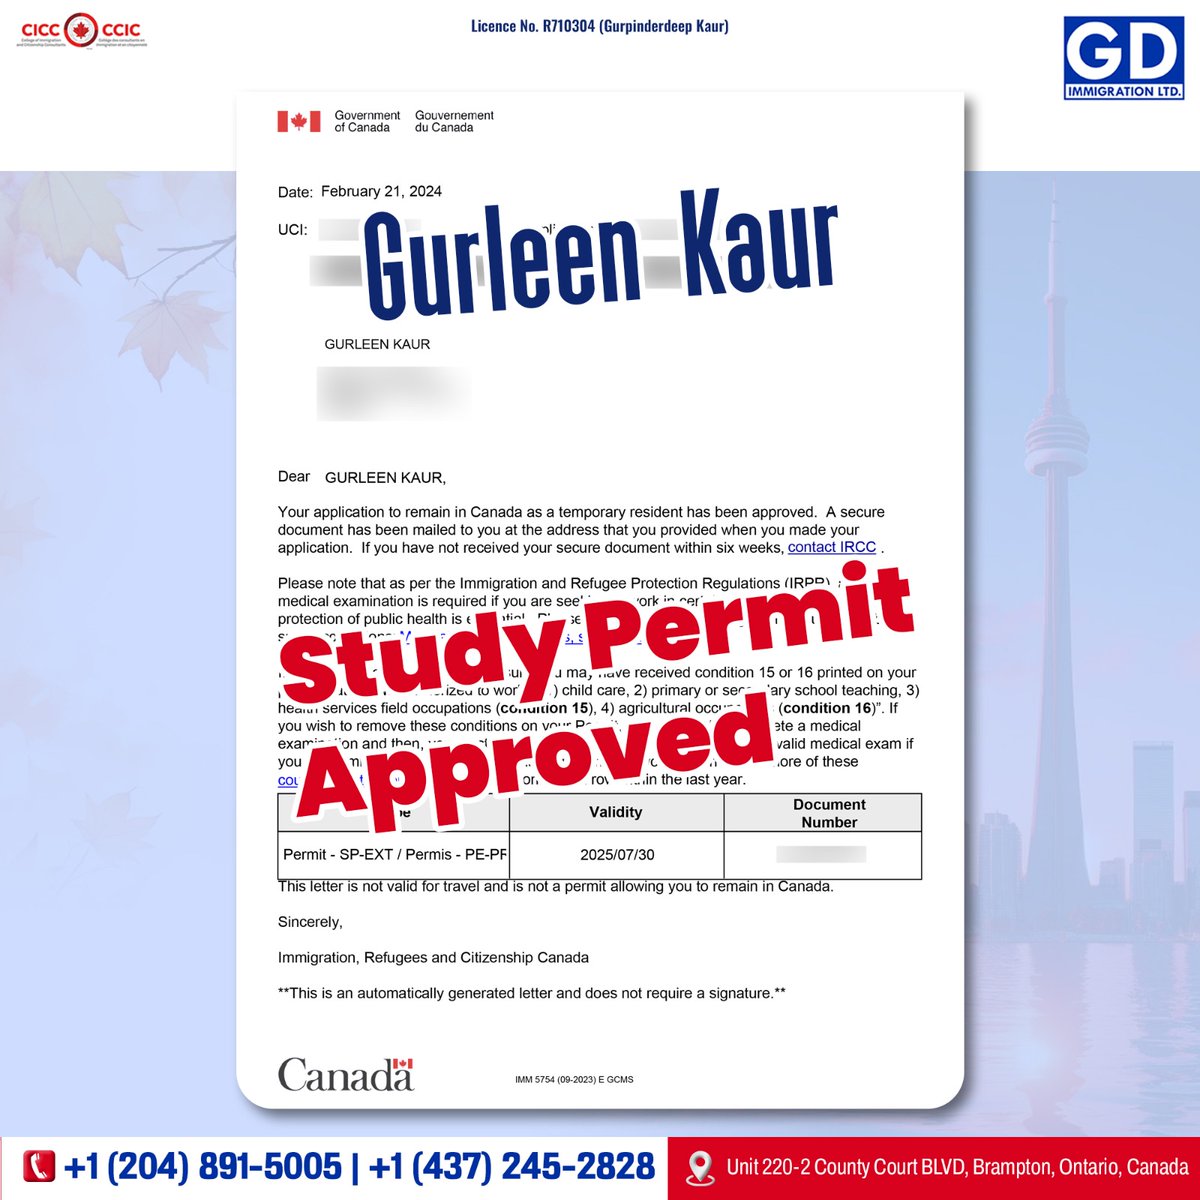 🎓 Congratulations to Gurleen Kaur on her Canada Study Visa approval with our seamless guidance! 🚀

.
.
#GDImmigration #Canada #CanadaStudyPermit #StudyPermit #SuccessStory #ExploreCanada #ImmigrationLetter #ExpertAdvice #ImmigrationExpert #visa #Immigration